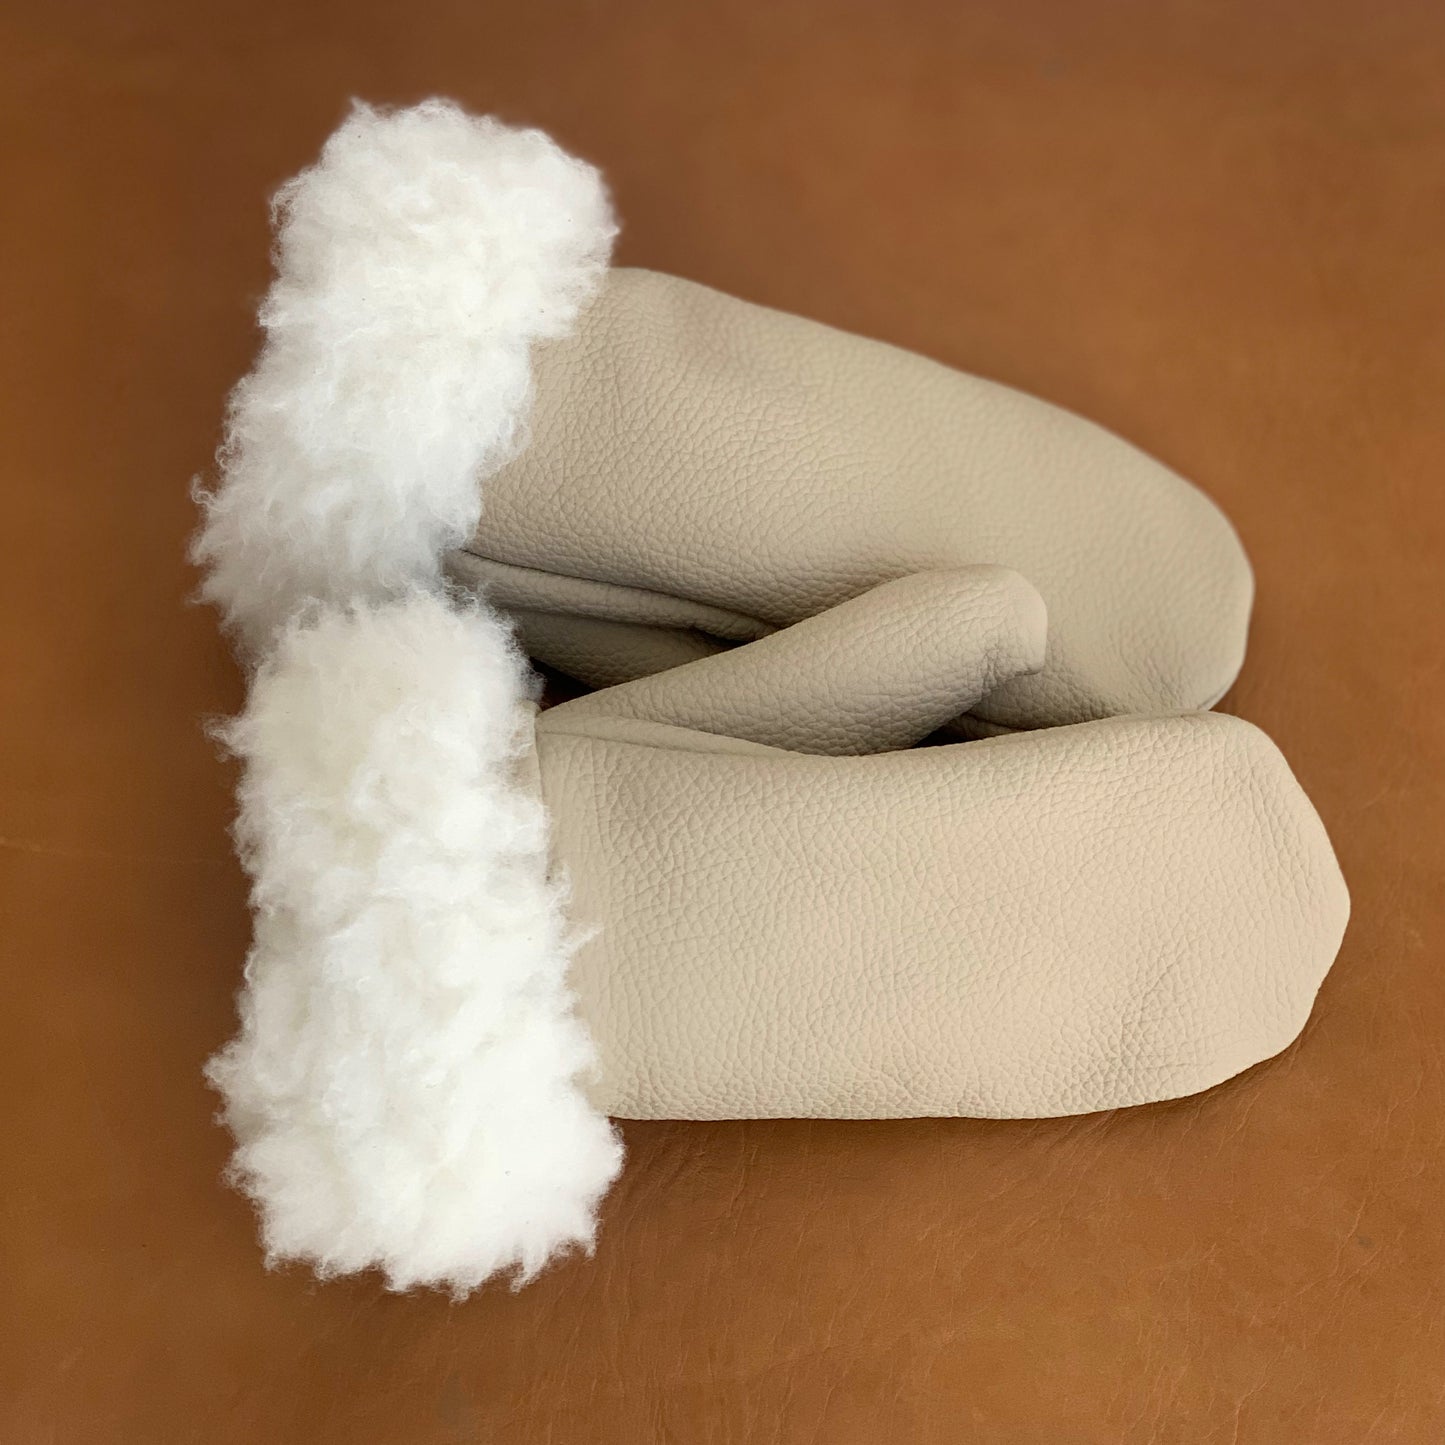 Padded leather mittens (gloves), size S-M (Color: BEIGE)